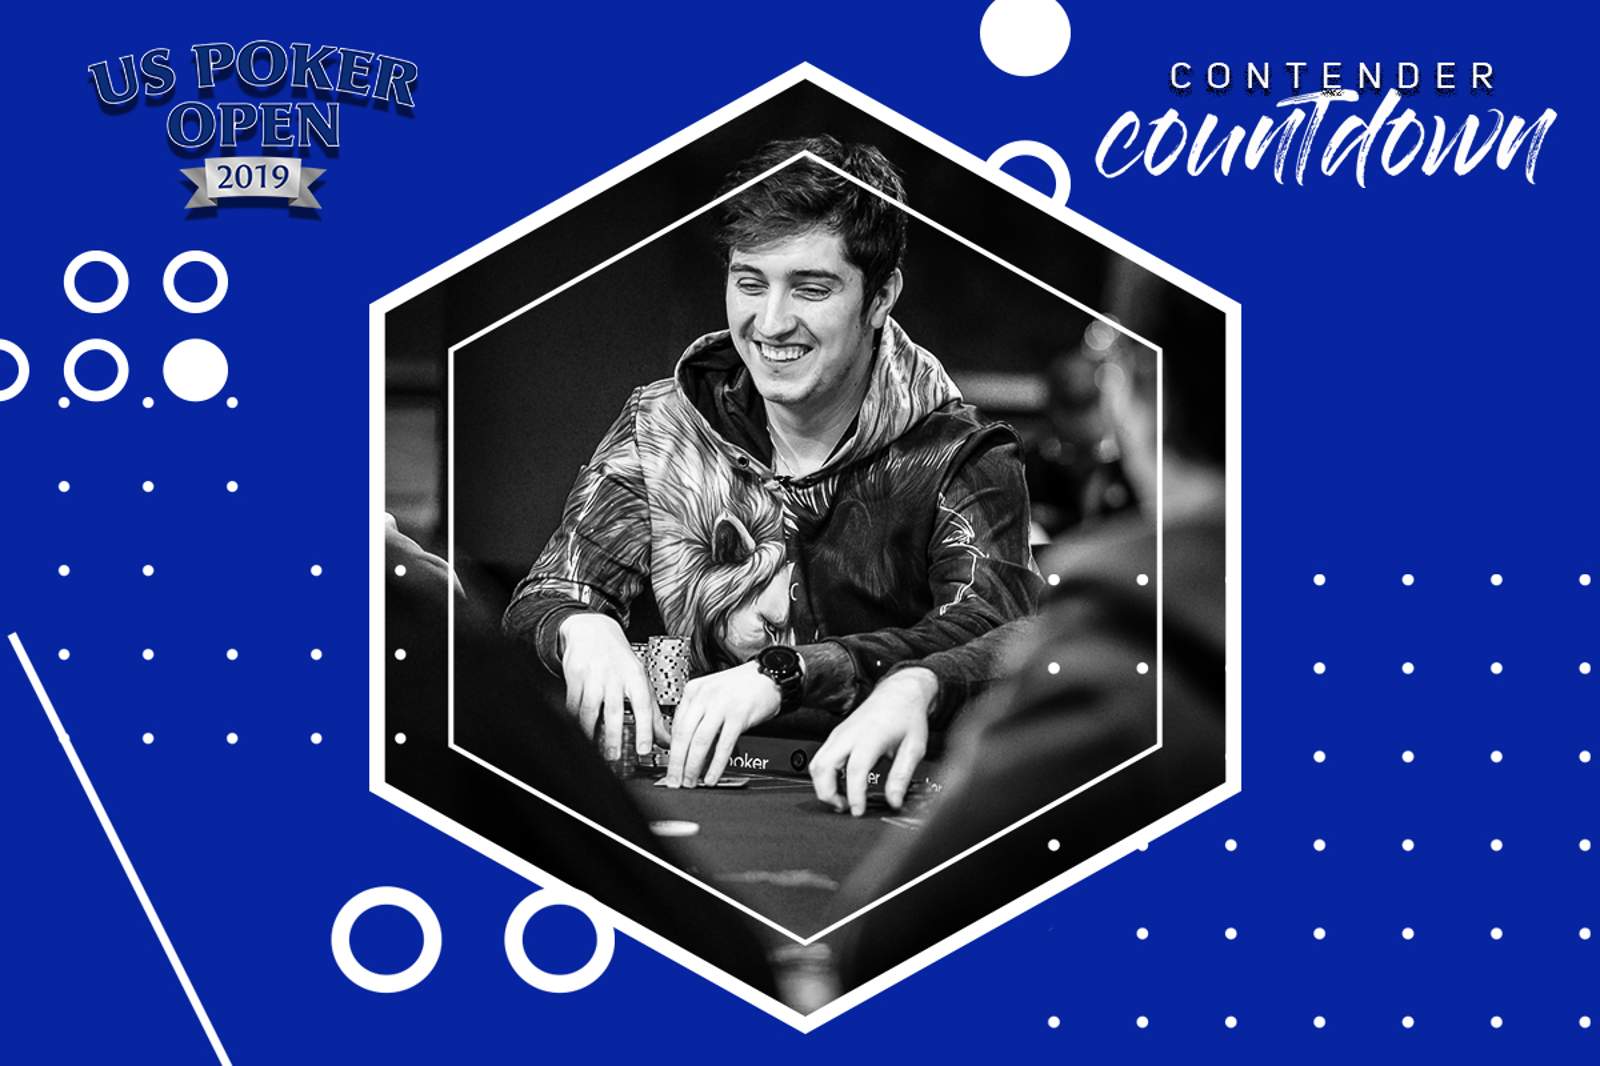 Find Out Why Ali Imsirovic Skipped PCA and Aussie Millions But He Won't Miss The U.S. Poker Open!